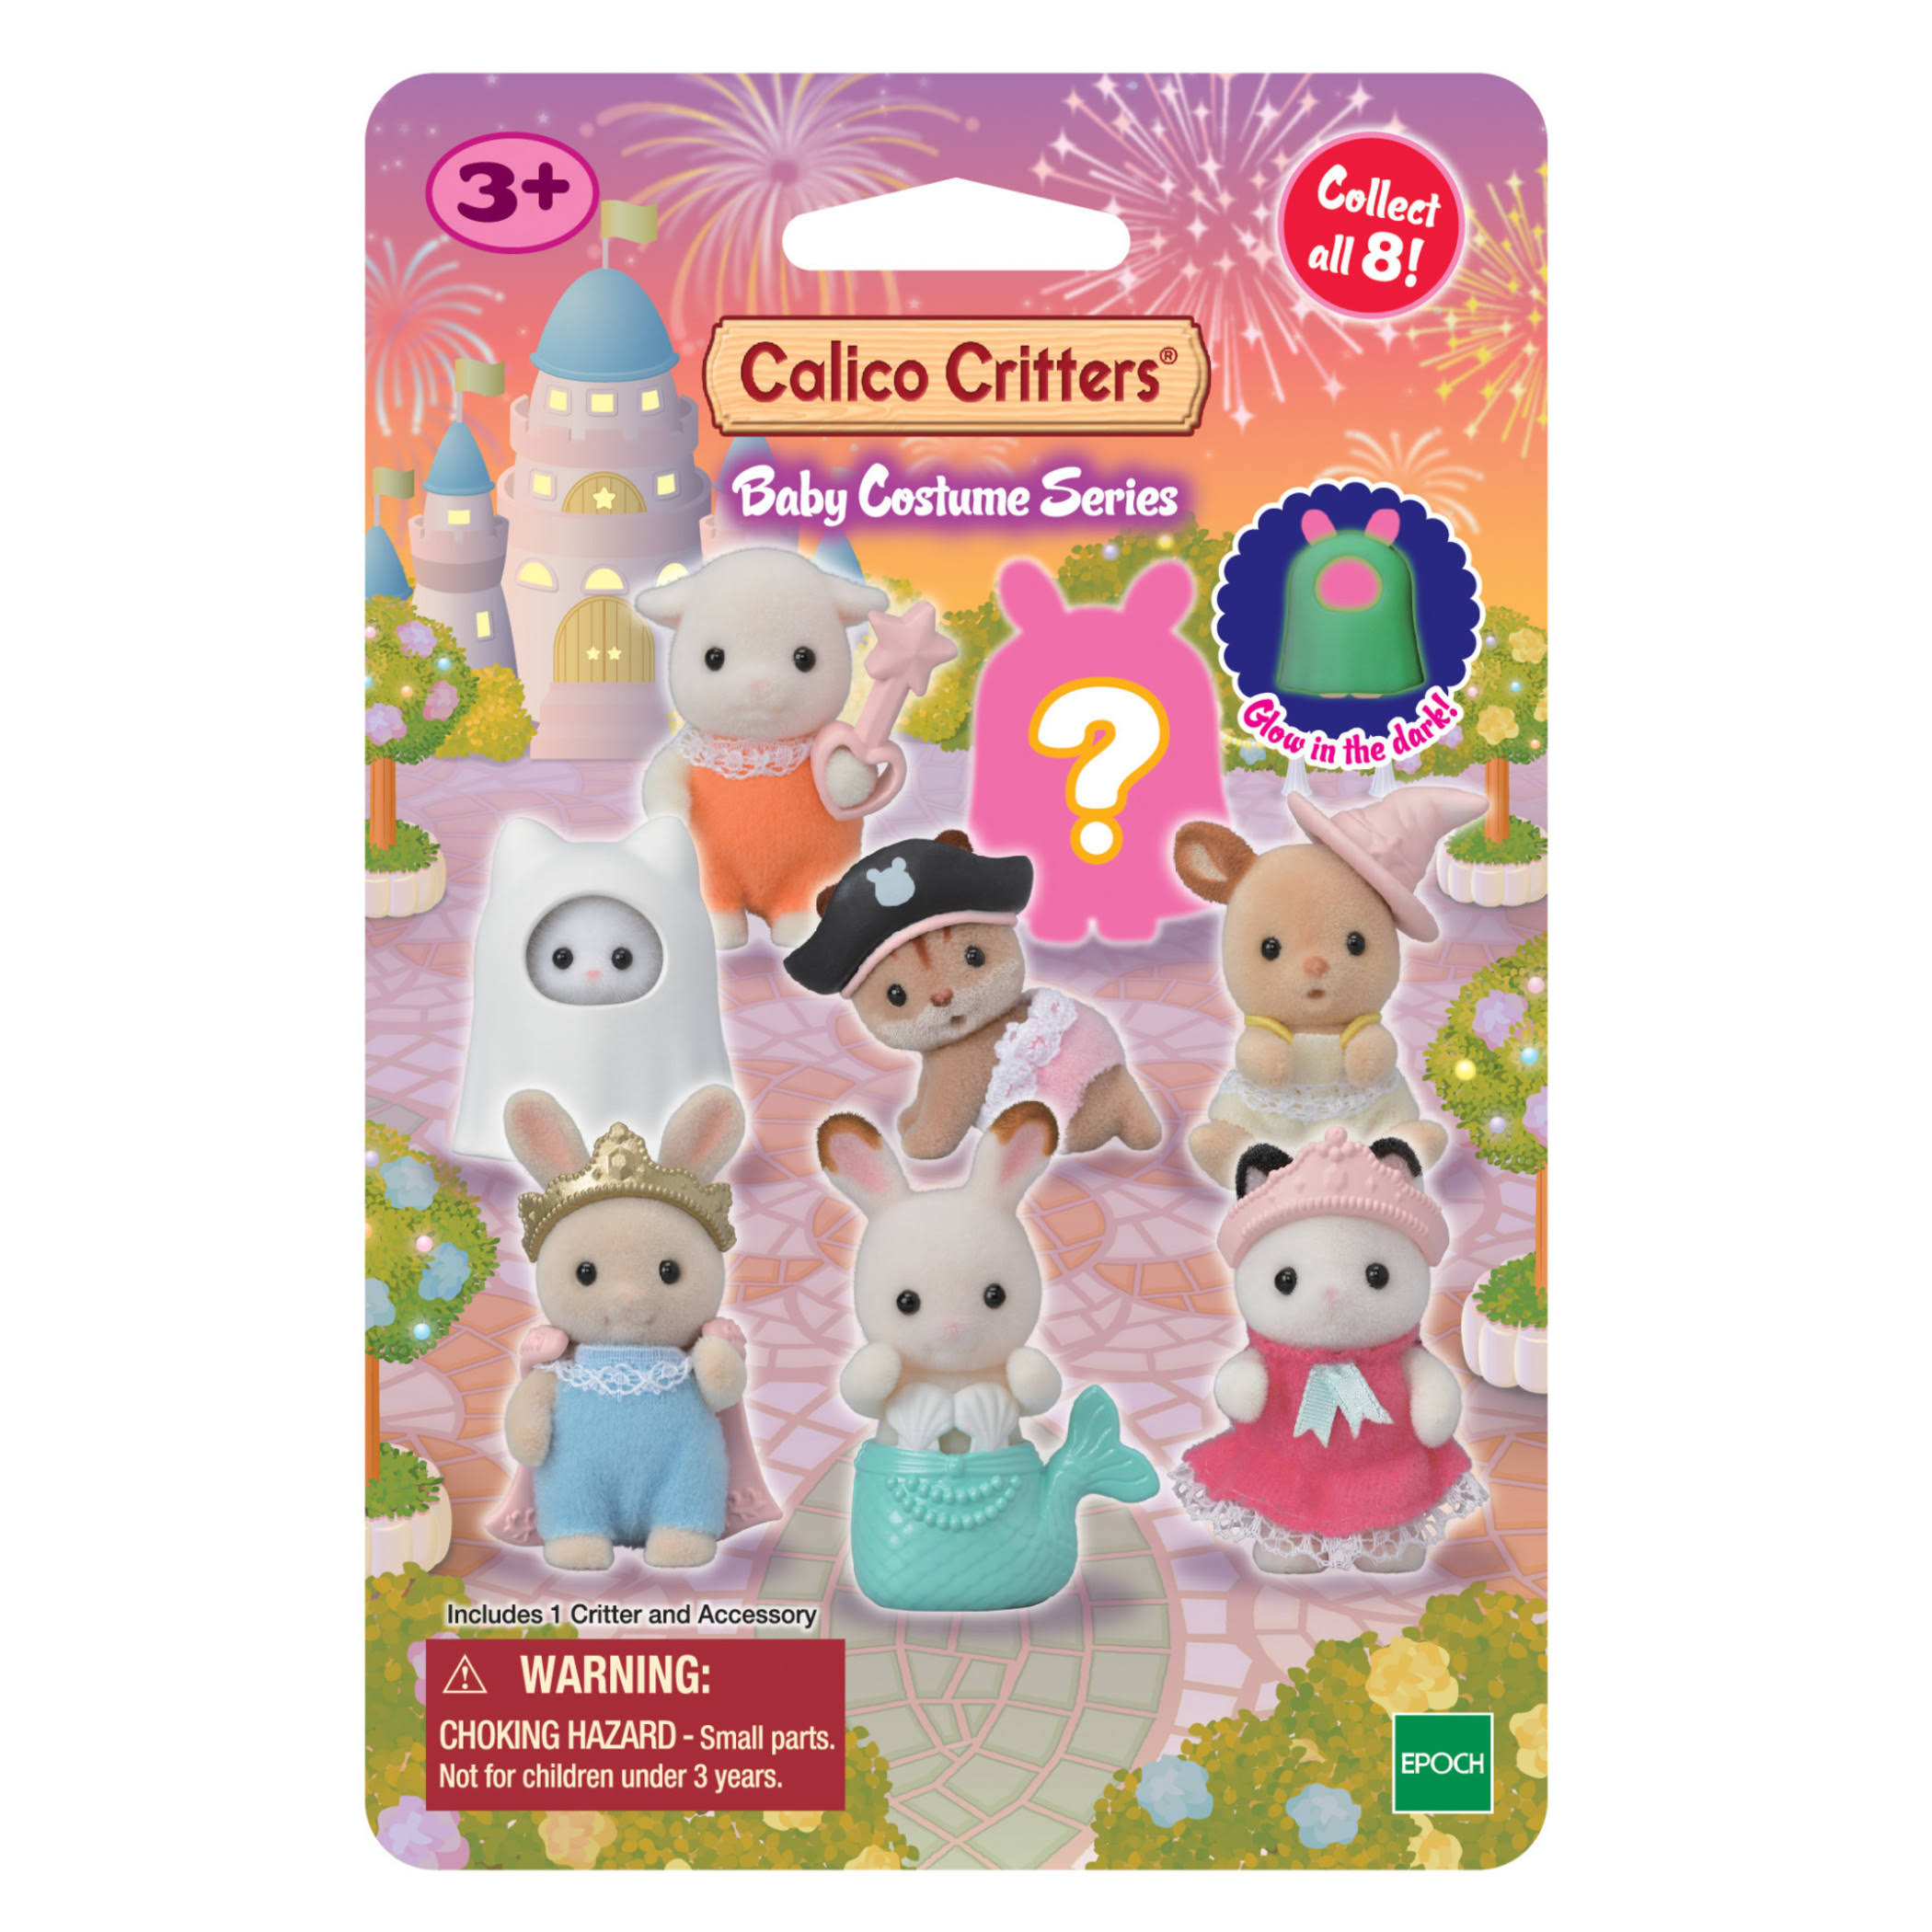 Calico Critters Baby Costume Series